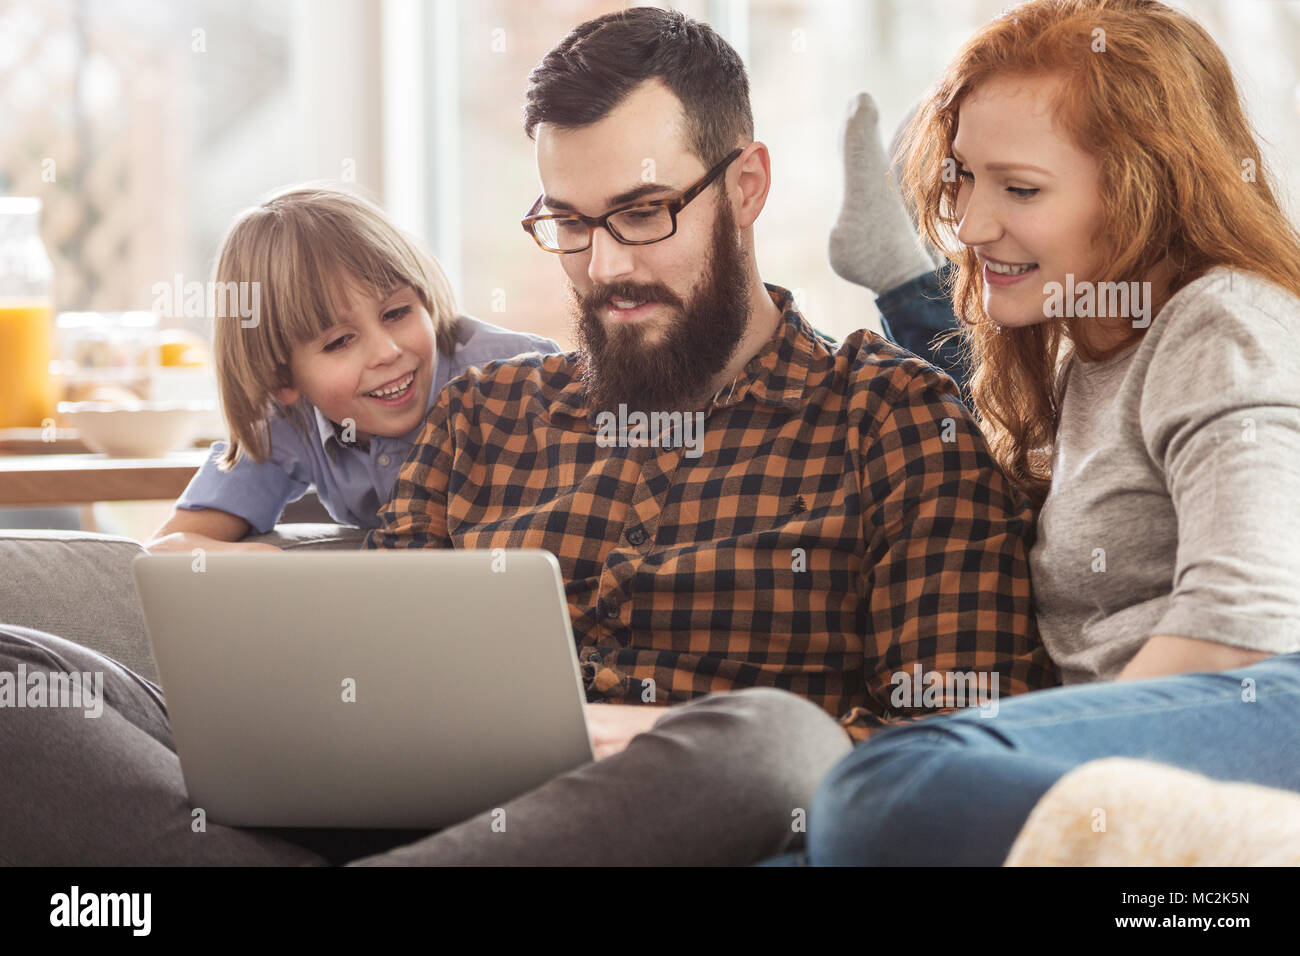 Happy family watching photos together on a laptop while sitting on a couch Stock Photo